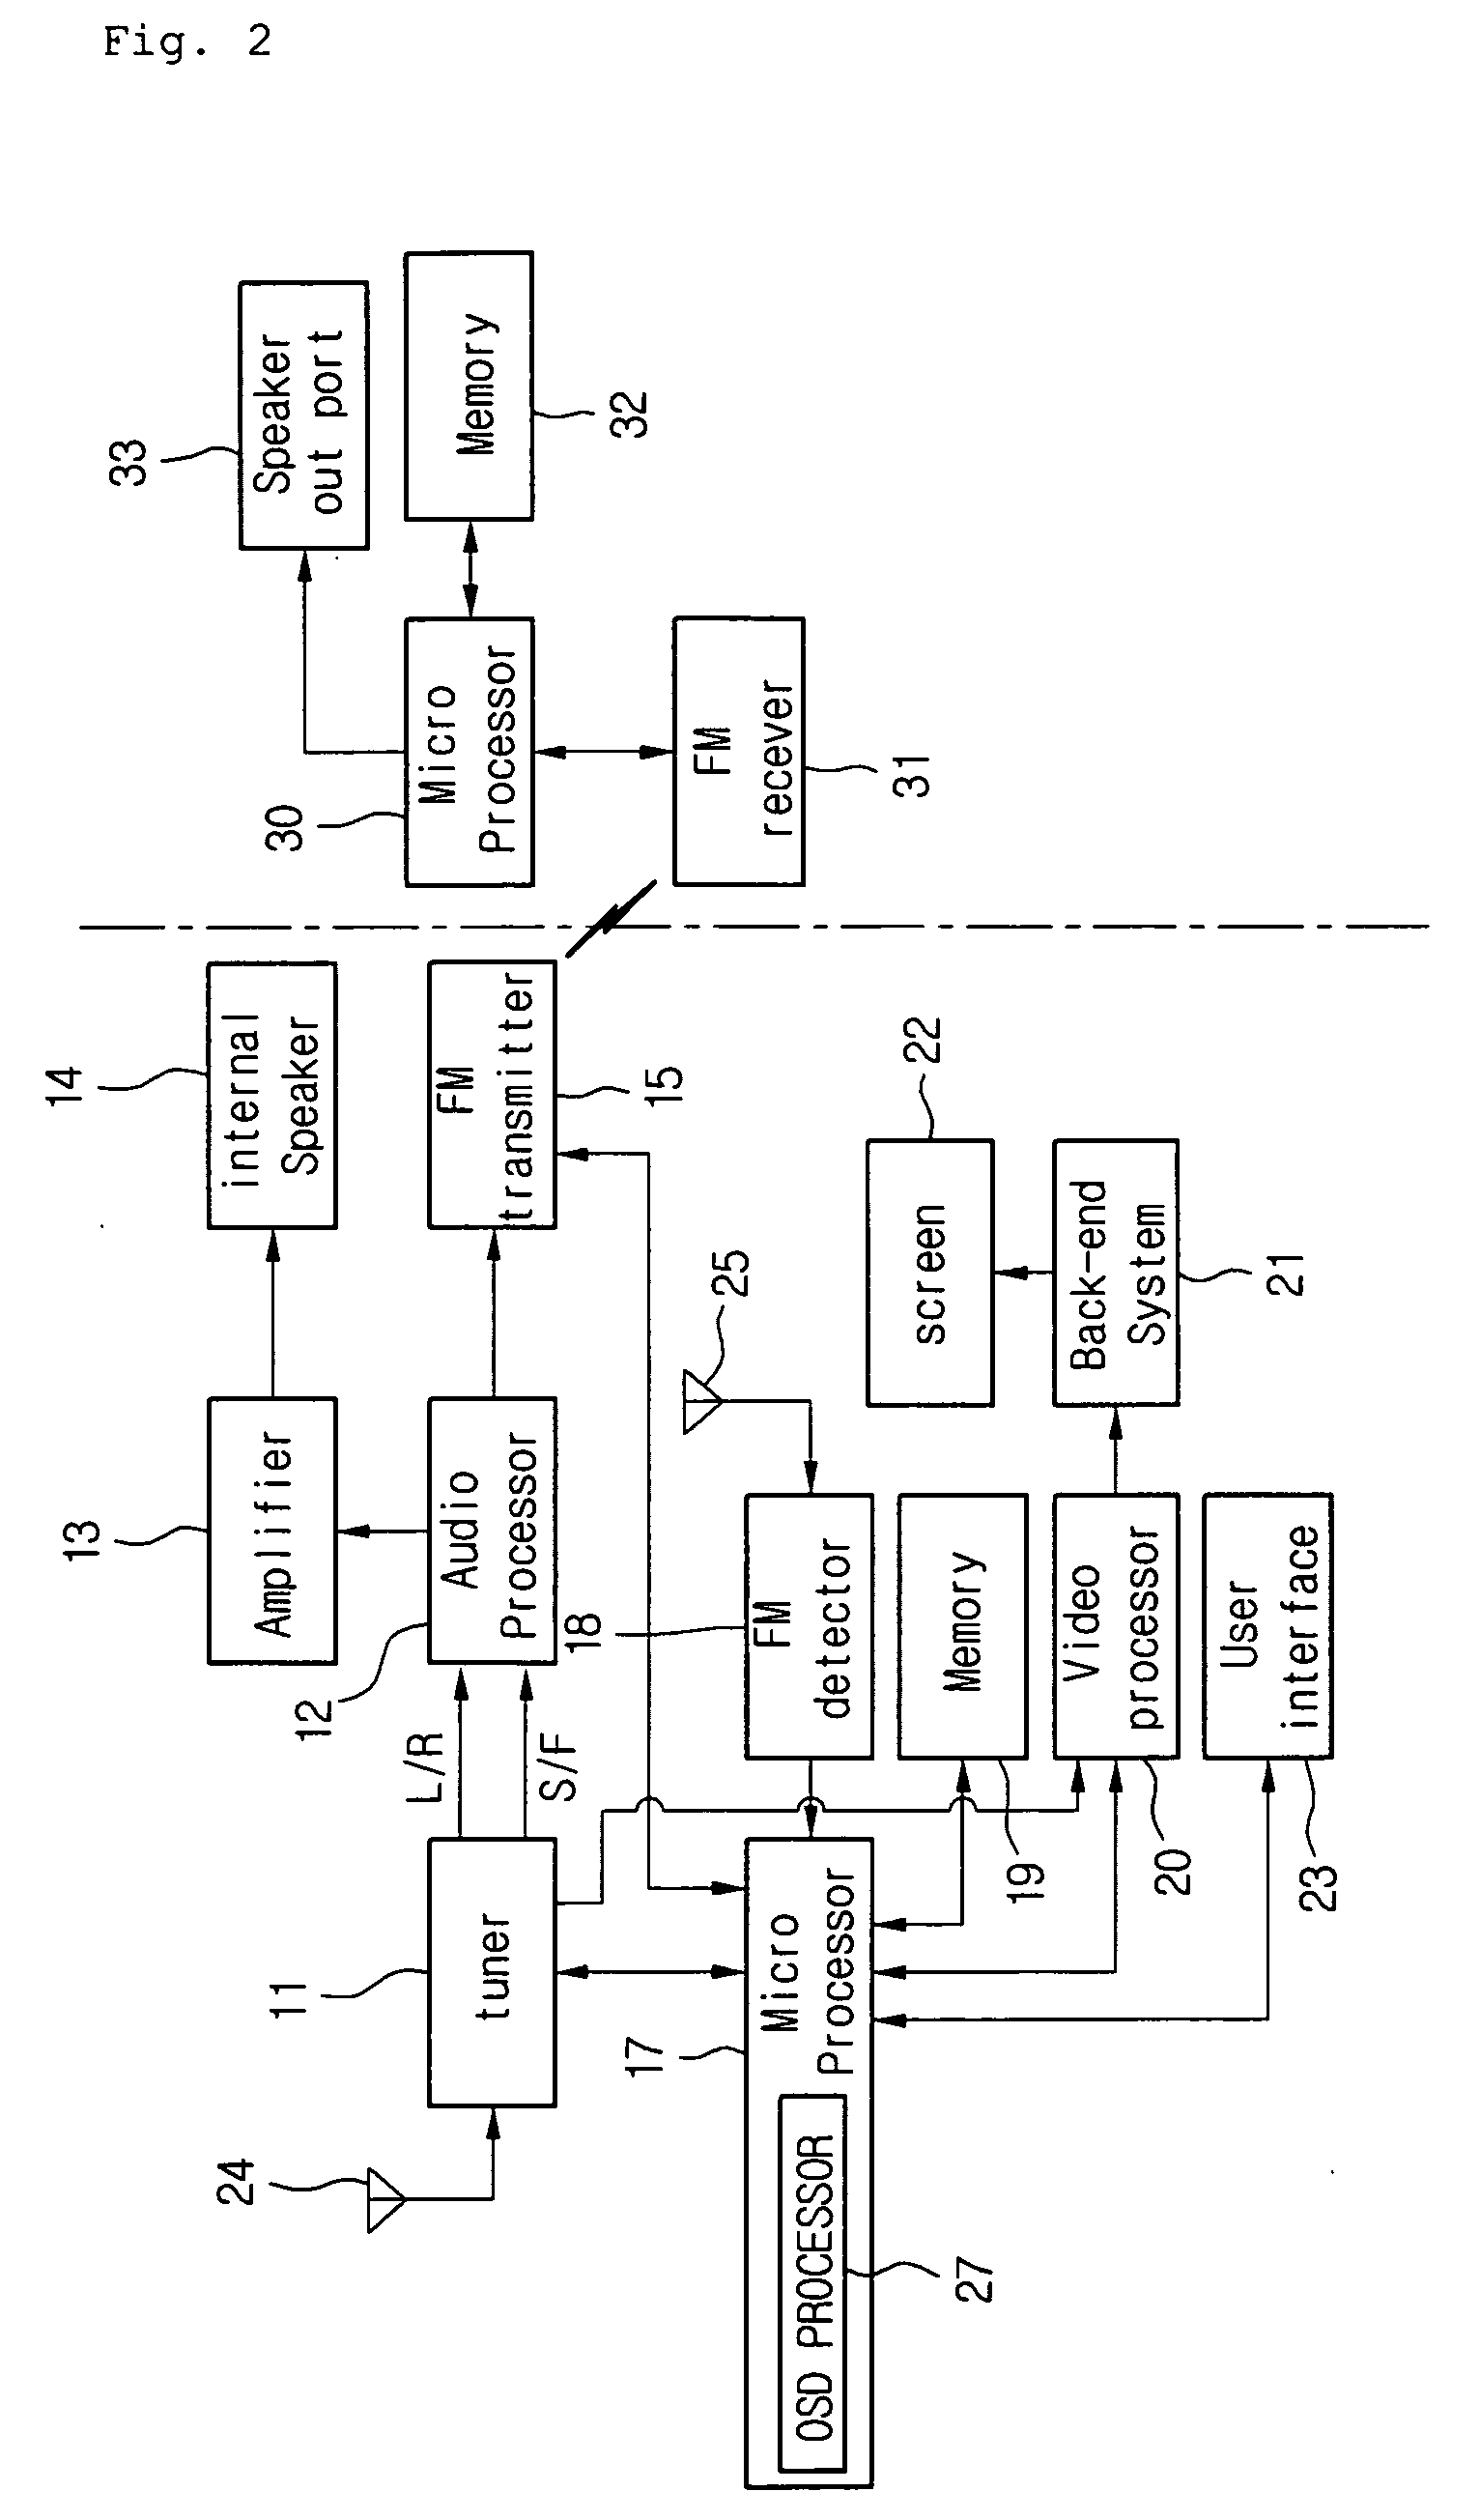 Display system and FM signal transferring method thereof